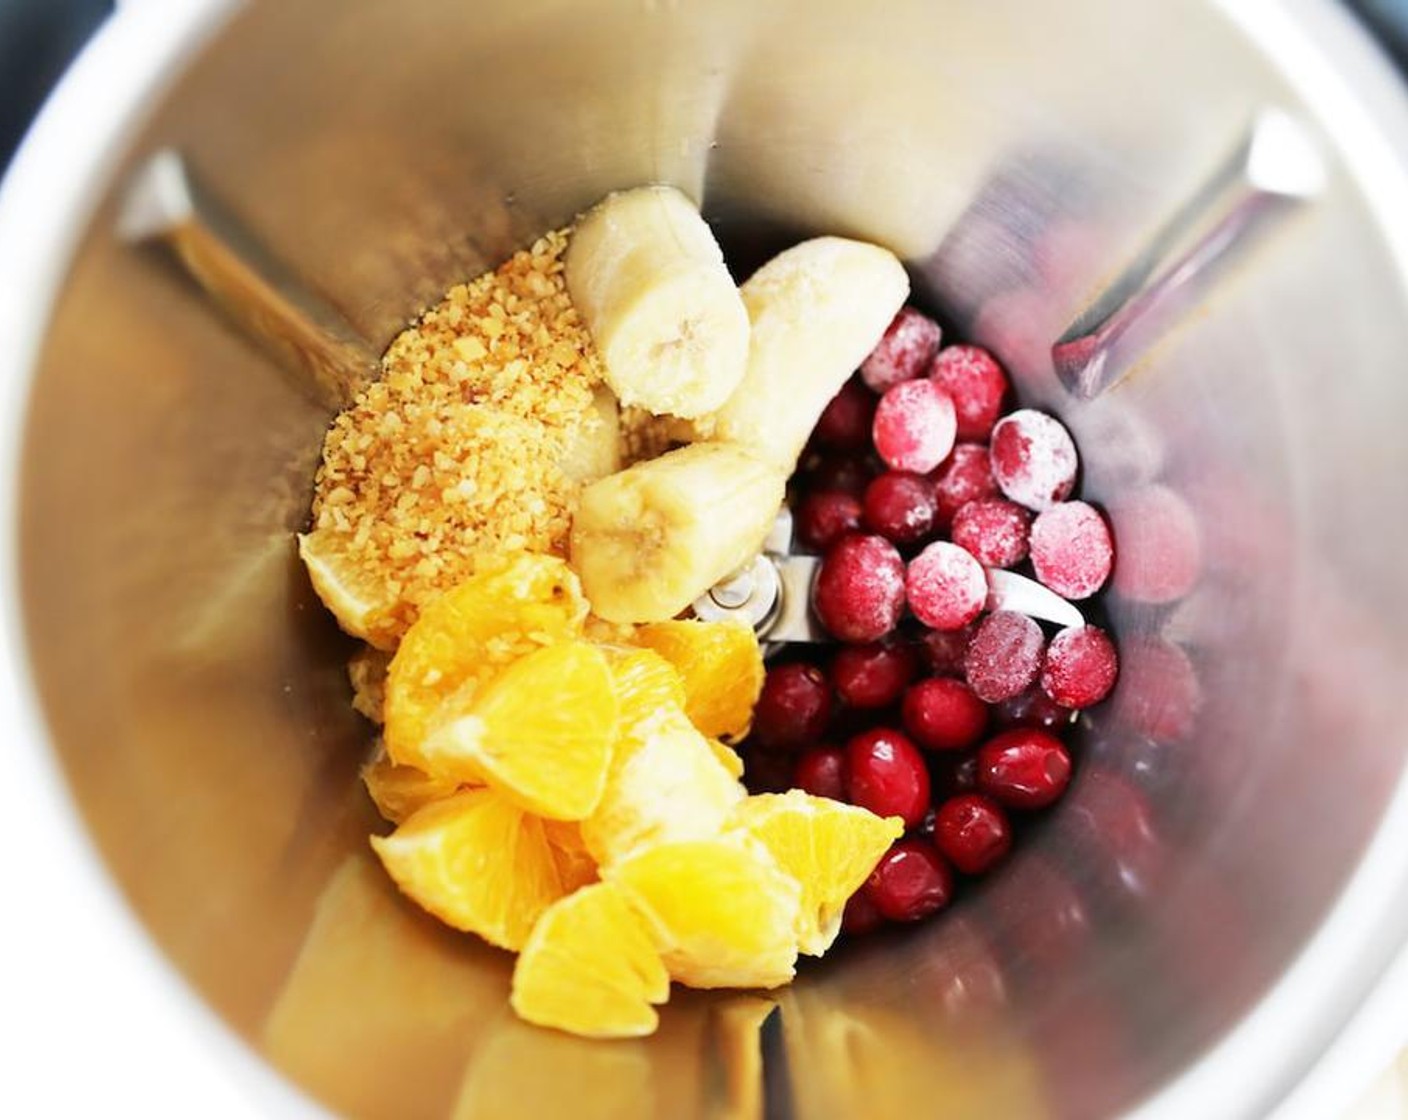 step 1 Add the Frozen Cranberry (1 cup), Banana (1/2 cup), Unsweetened Coconut Flakes (1/3 cup), Oranges (1 1/3 cups), Vanilla Extract (1 1/4 tsp), and Maple Syrup (1 oz) to the jug and blend on Speed 5 for 50 seconds.